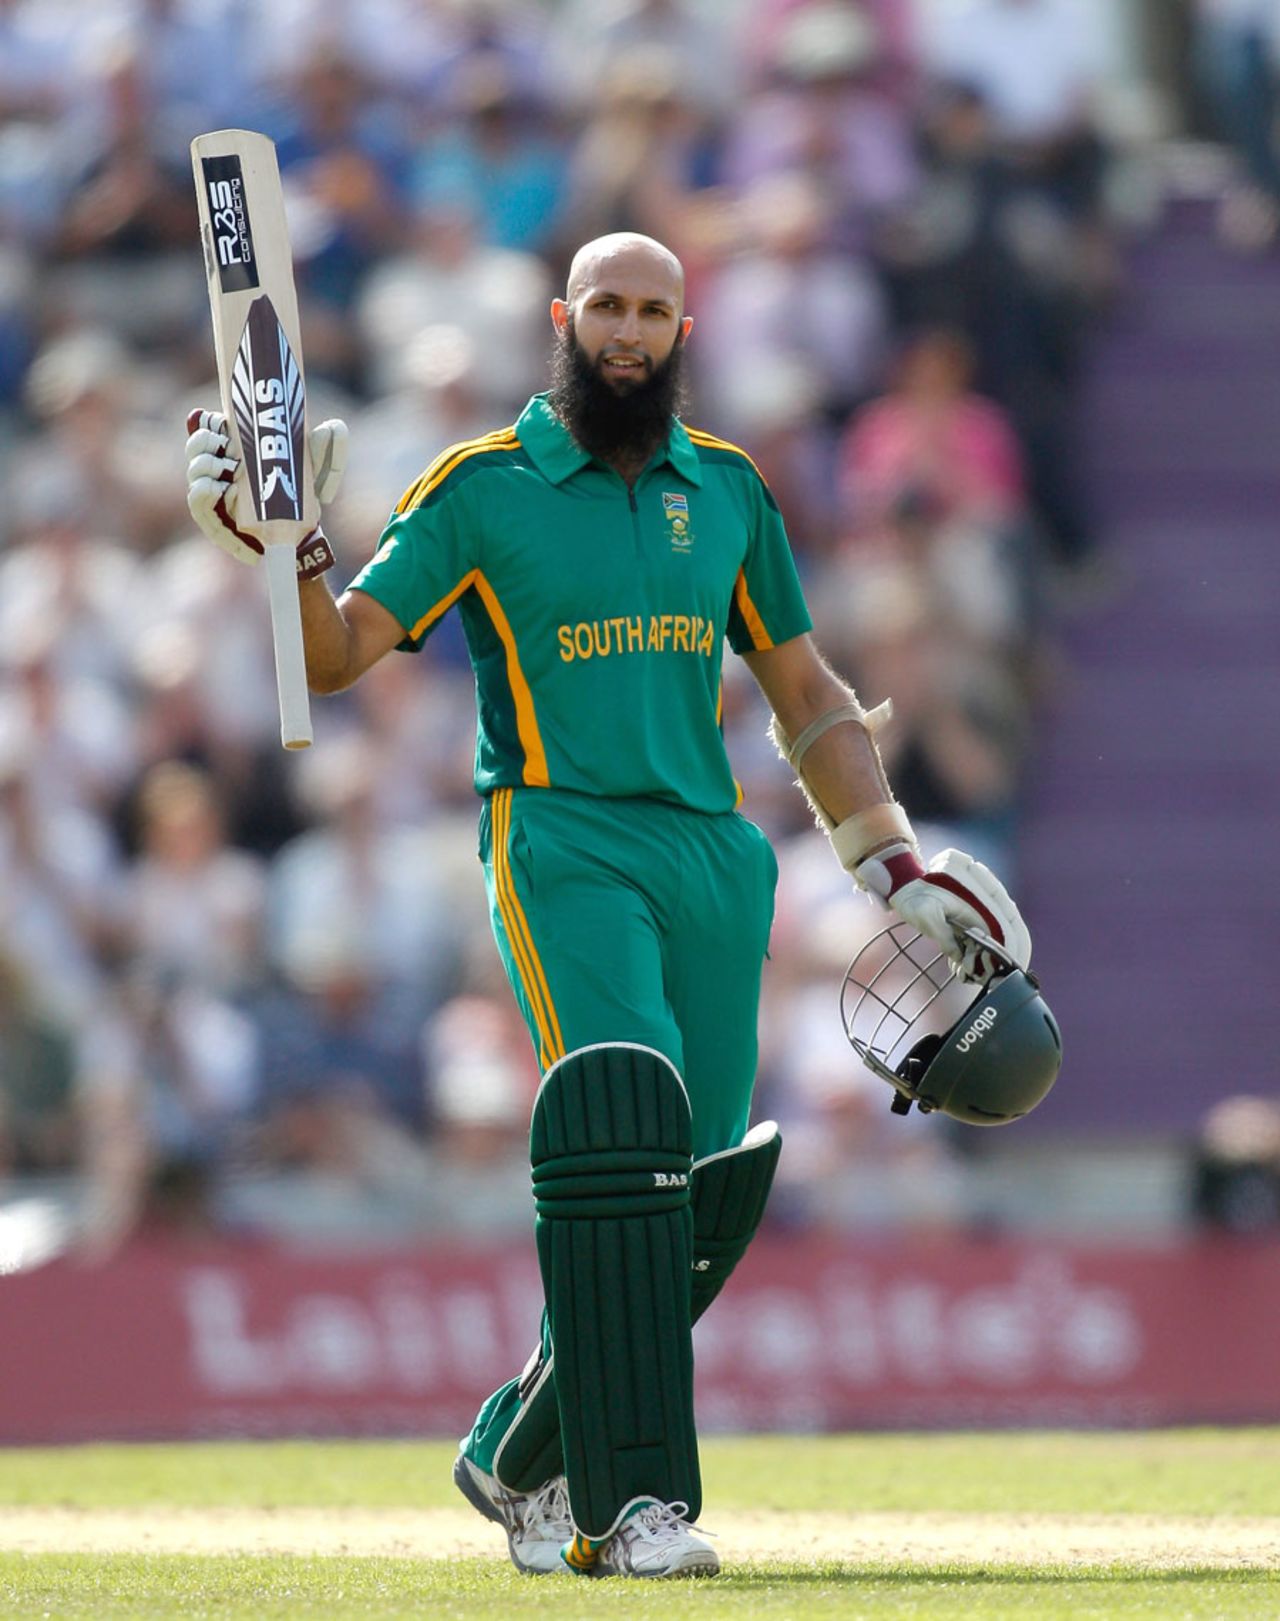 Hashim Amla made his best ODI score of 150, England v South Africa, 2nd NatWest ODI, West End, August 28, 2012